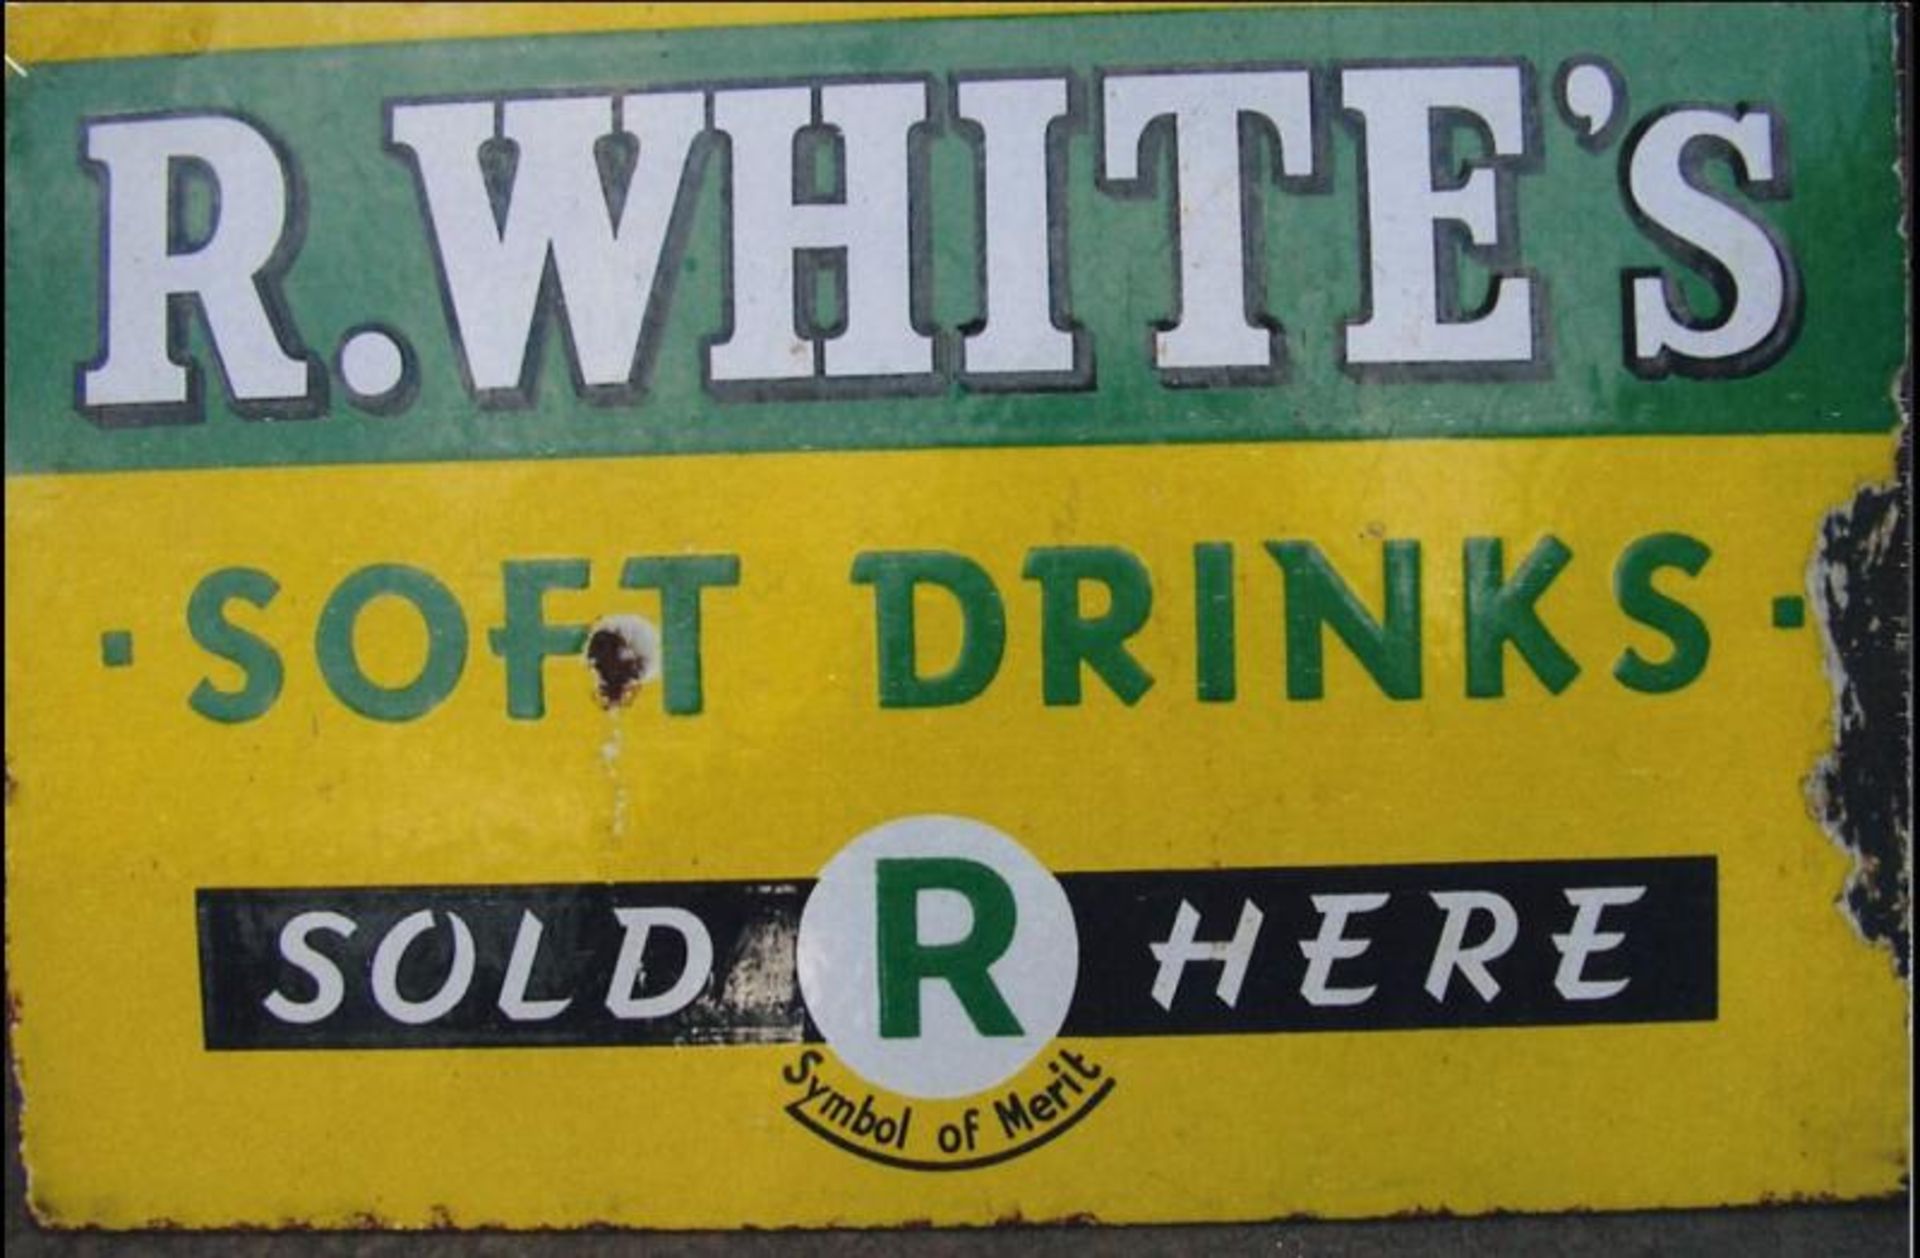 R Whites soft drinks sold here, double sided enamel sign 12' x 18'